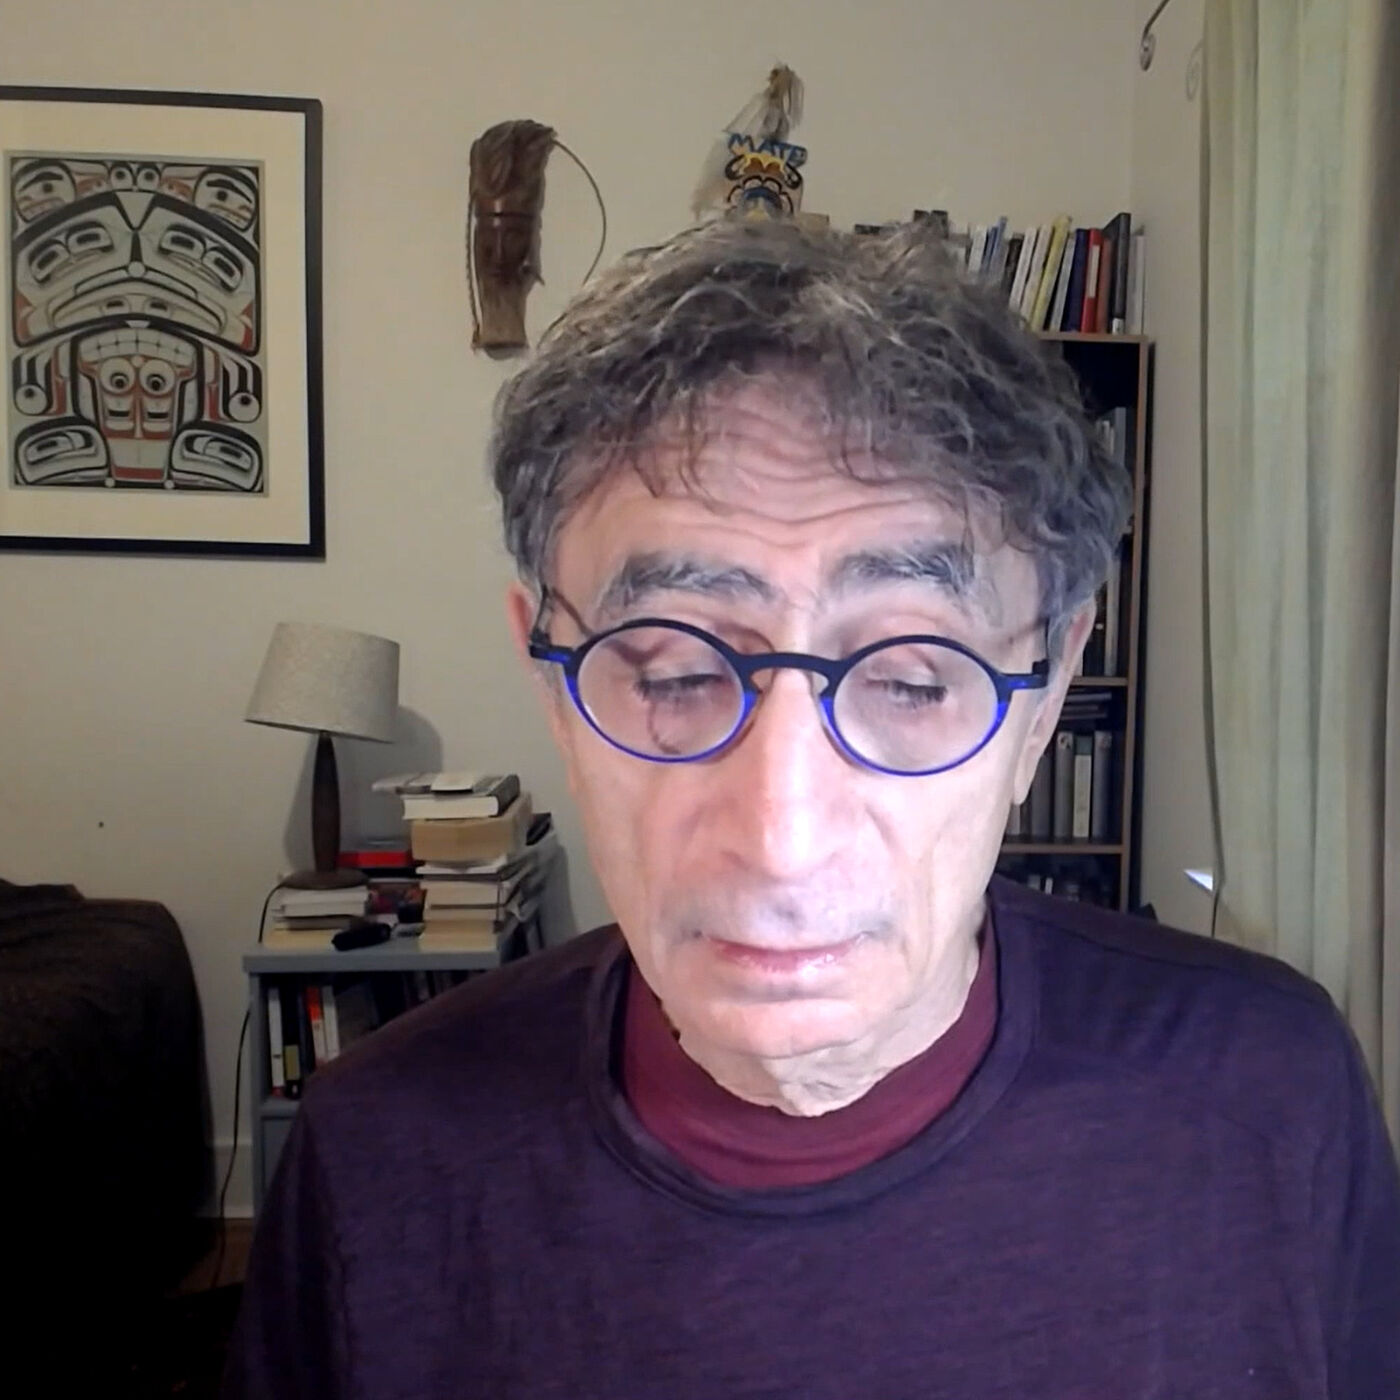 #47 Dr. Gabor Mate joins us for a conversation on trauma, addiction, drug policy & self-care.